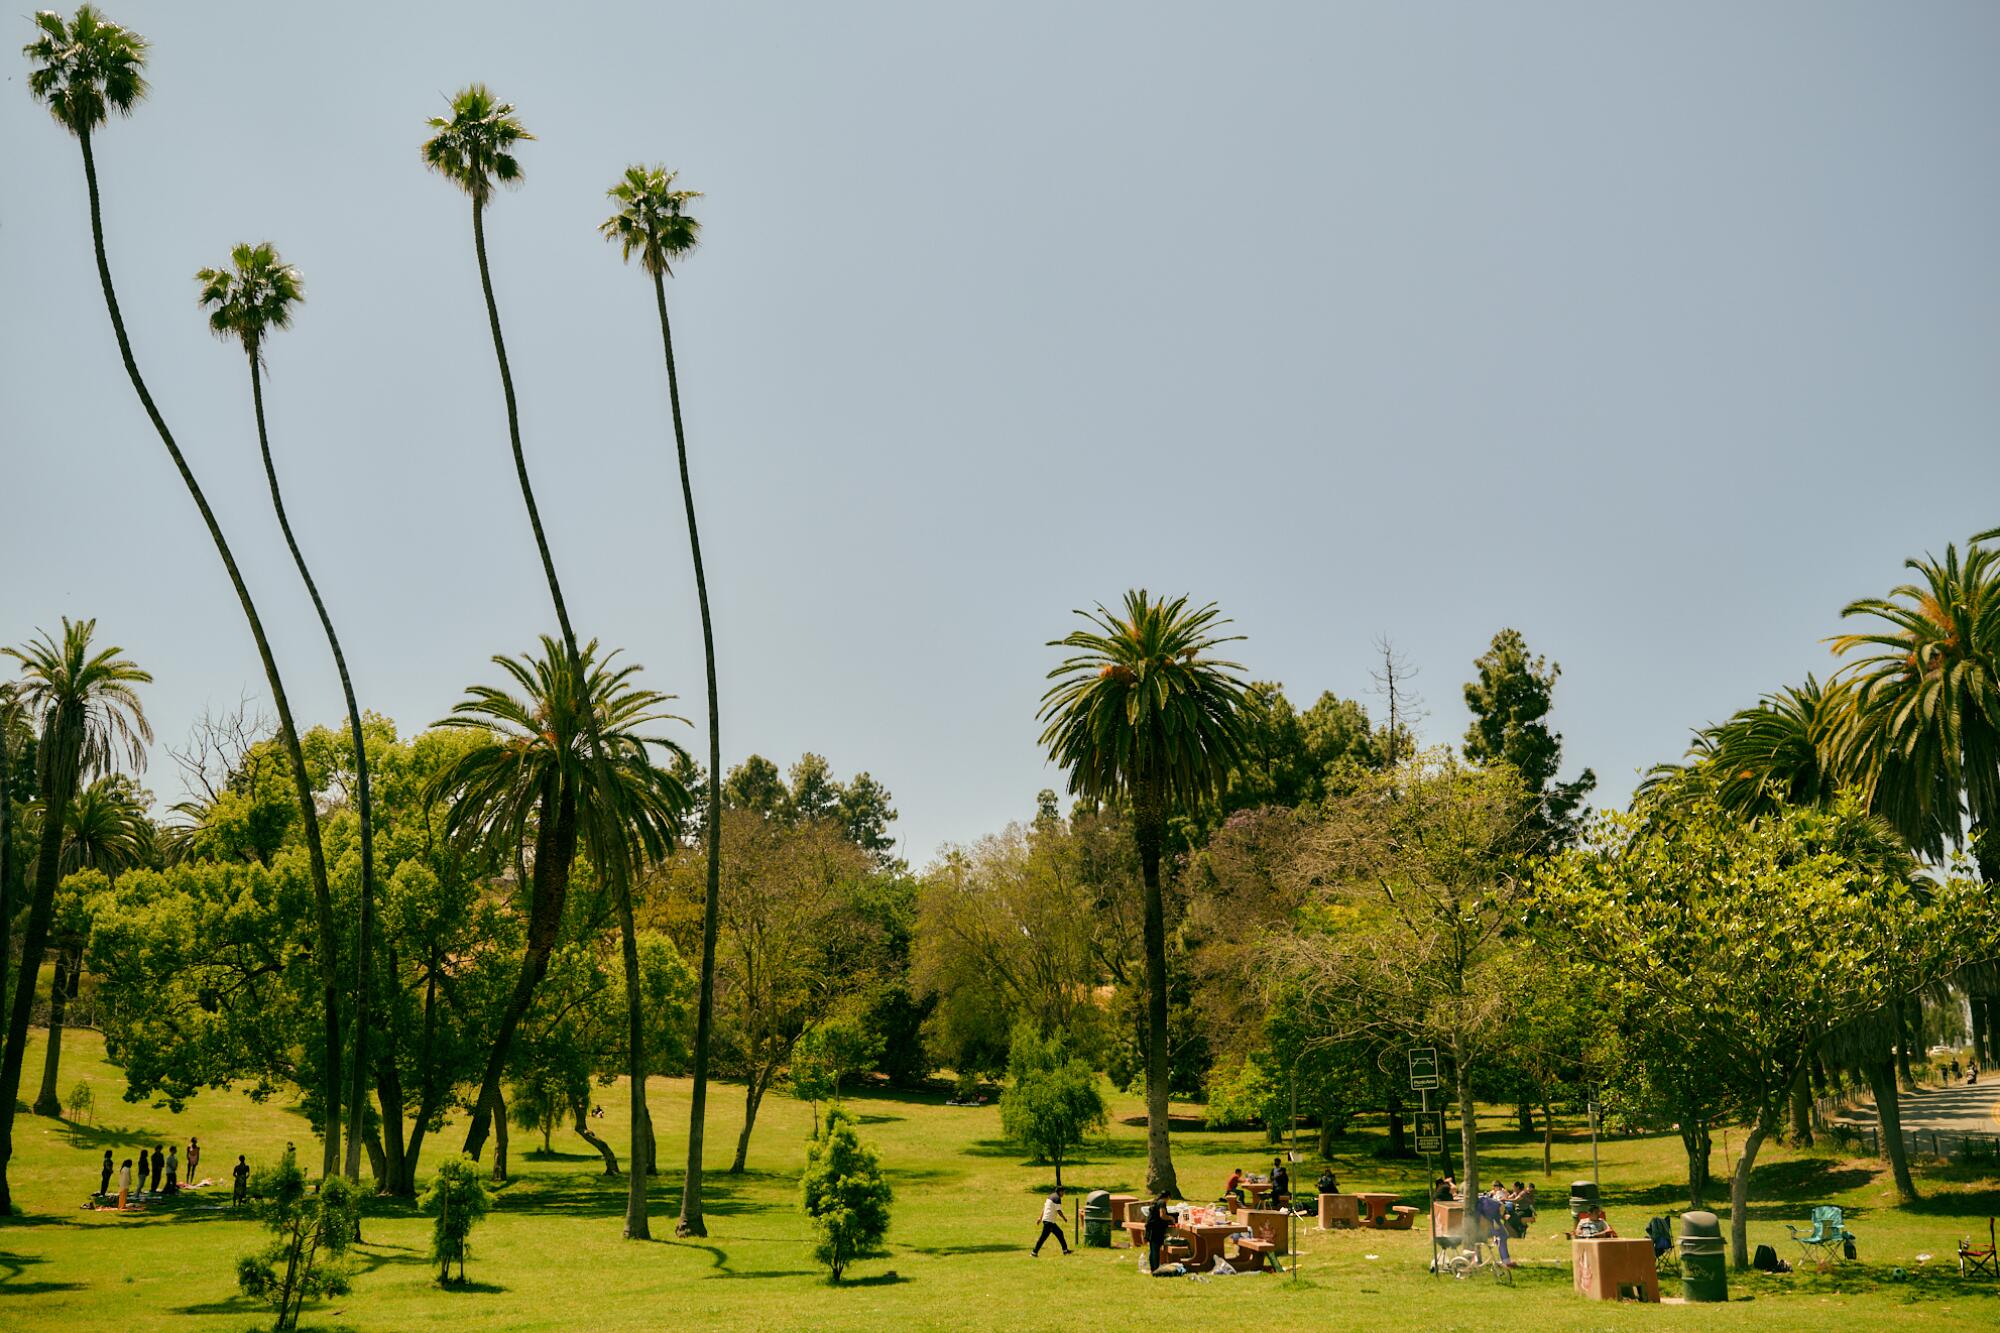 A view of the Elysian Park skyline; palm trees tower over picnic tables.